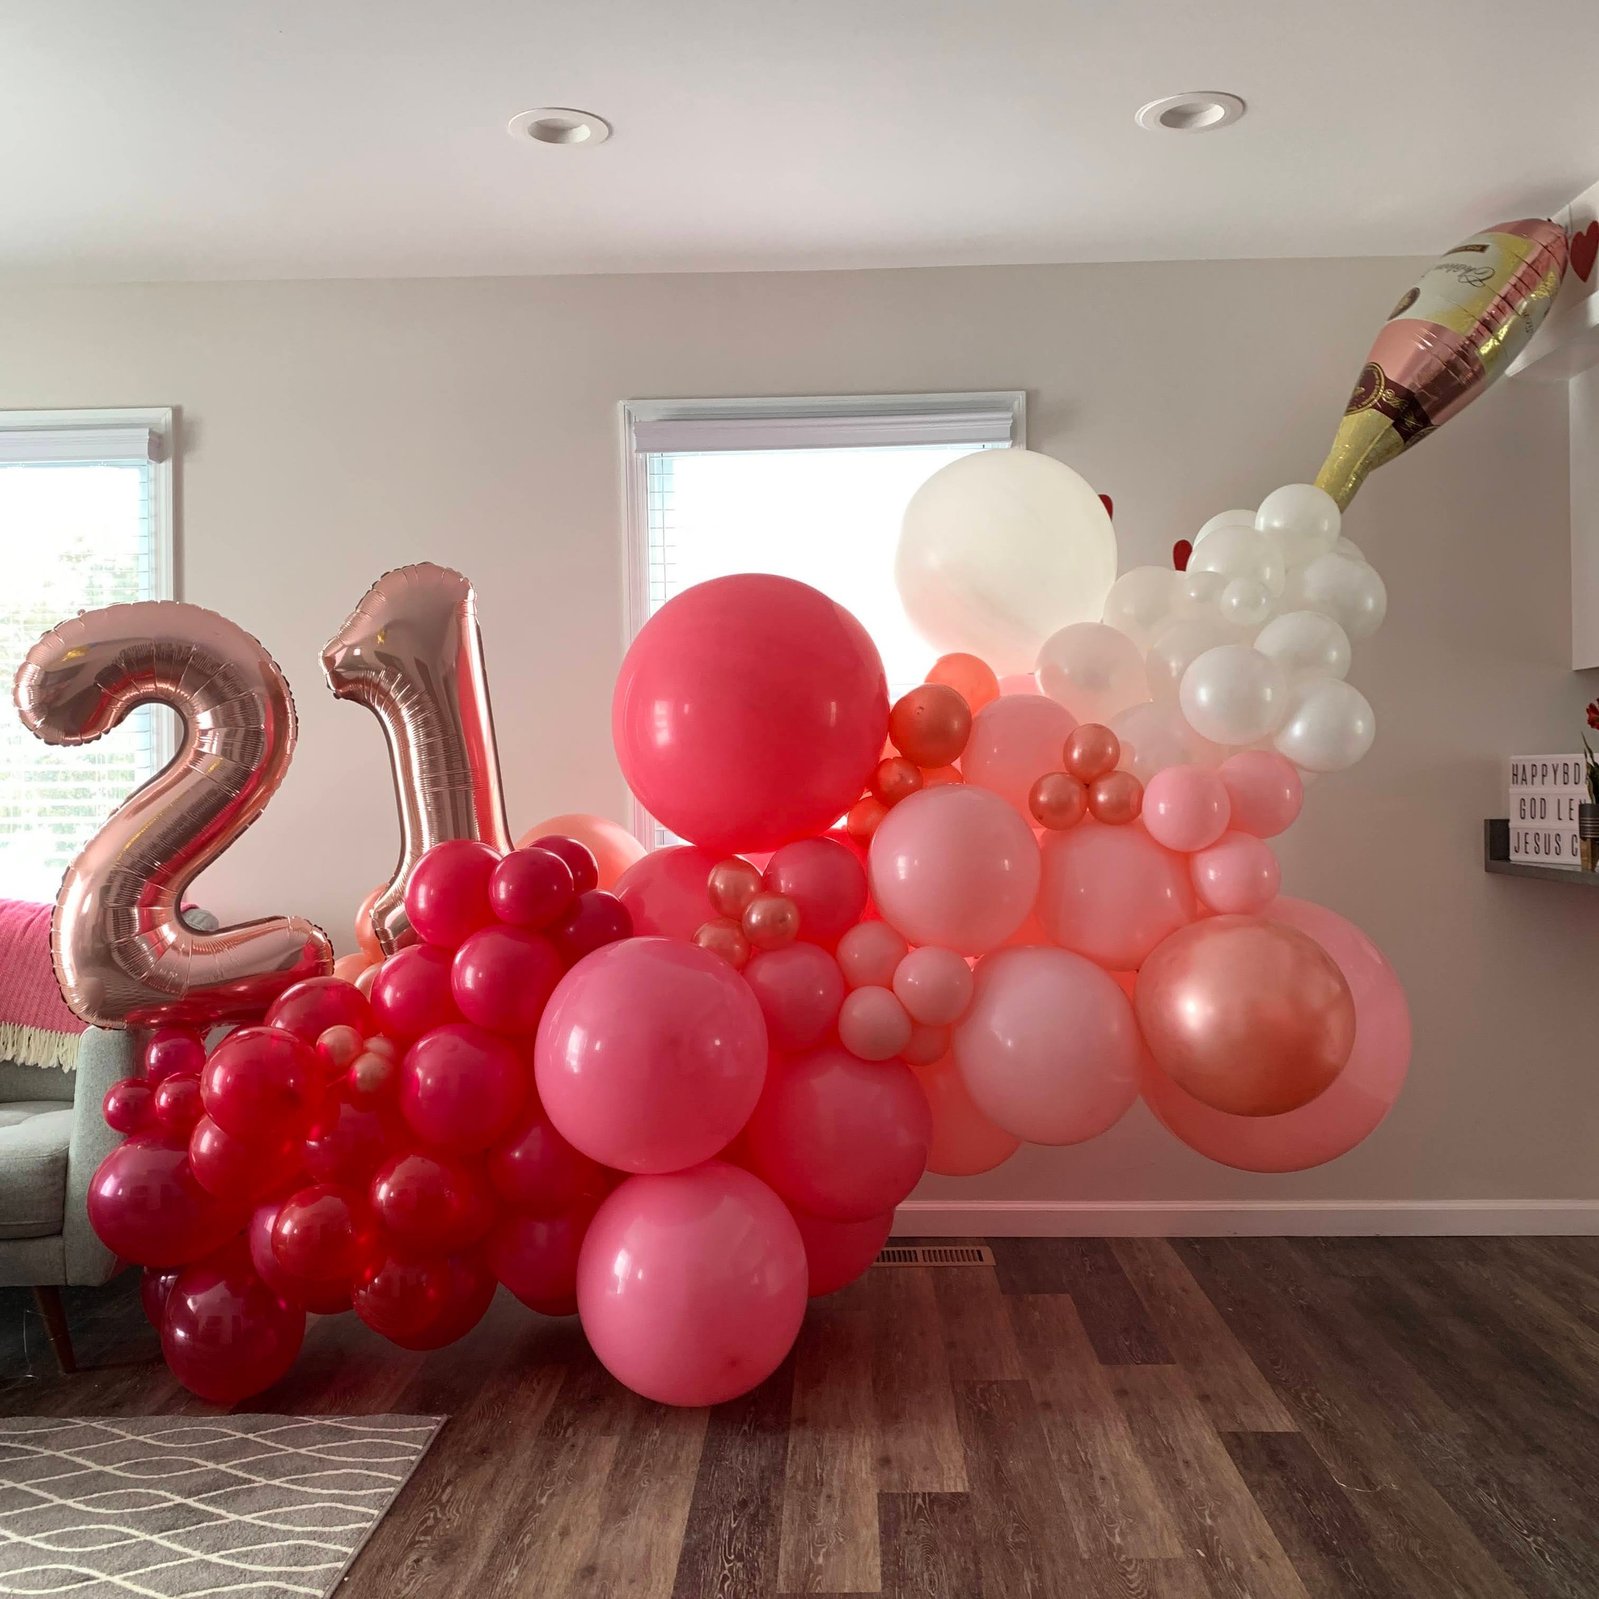 In front of a white wall is a large balloon garland of pink and white balloons with 21 number mylar balloons and a champagne bottle balloon